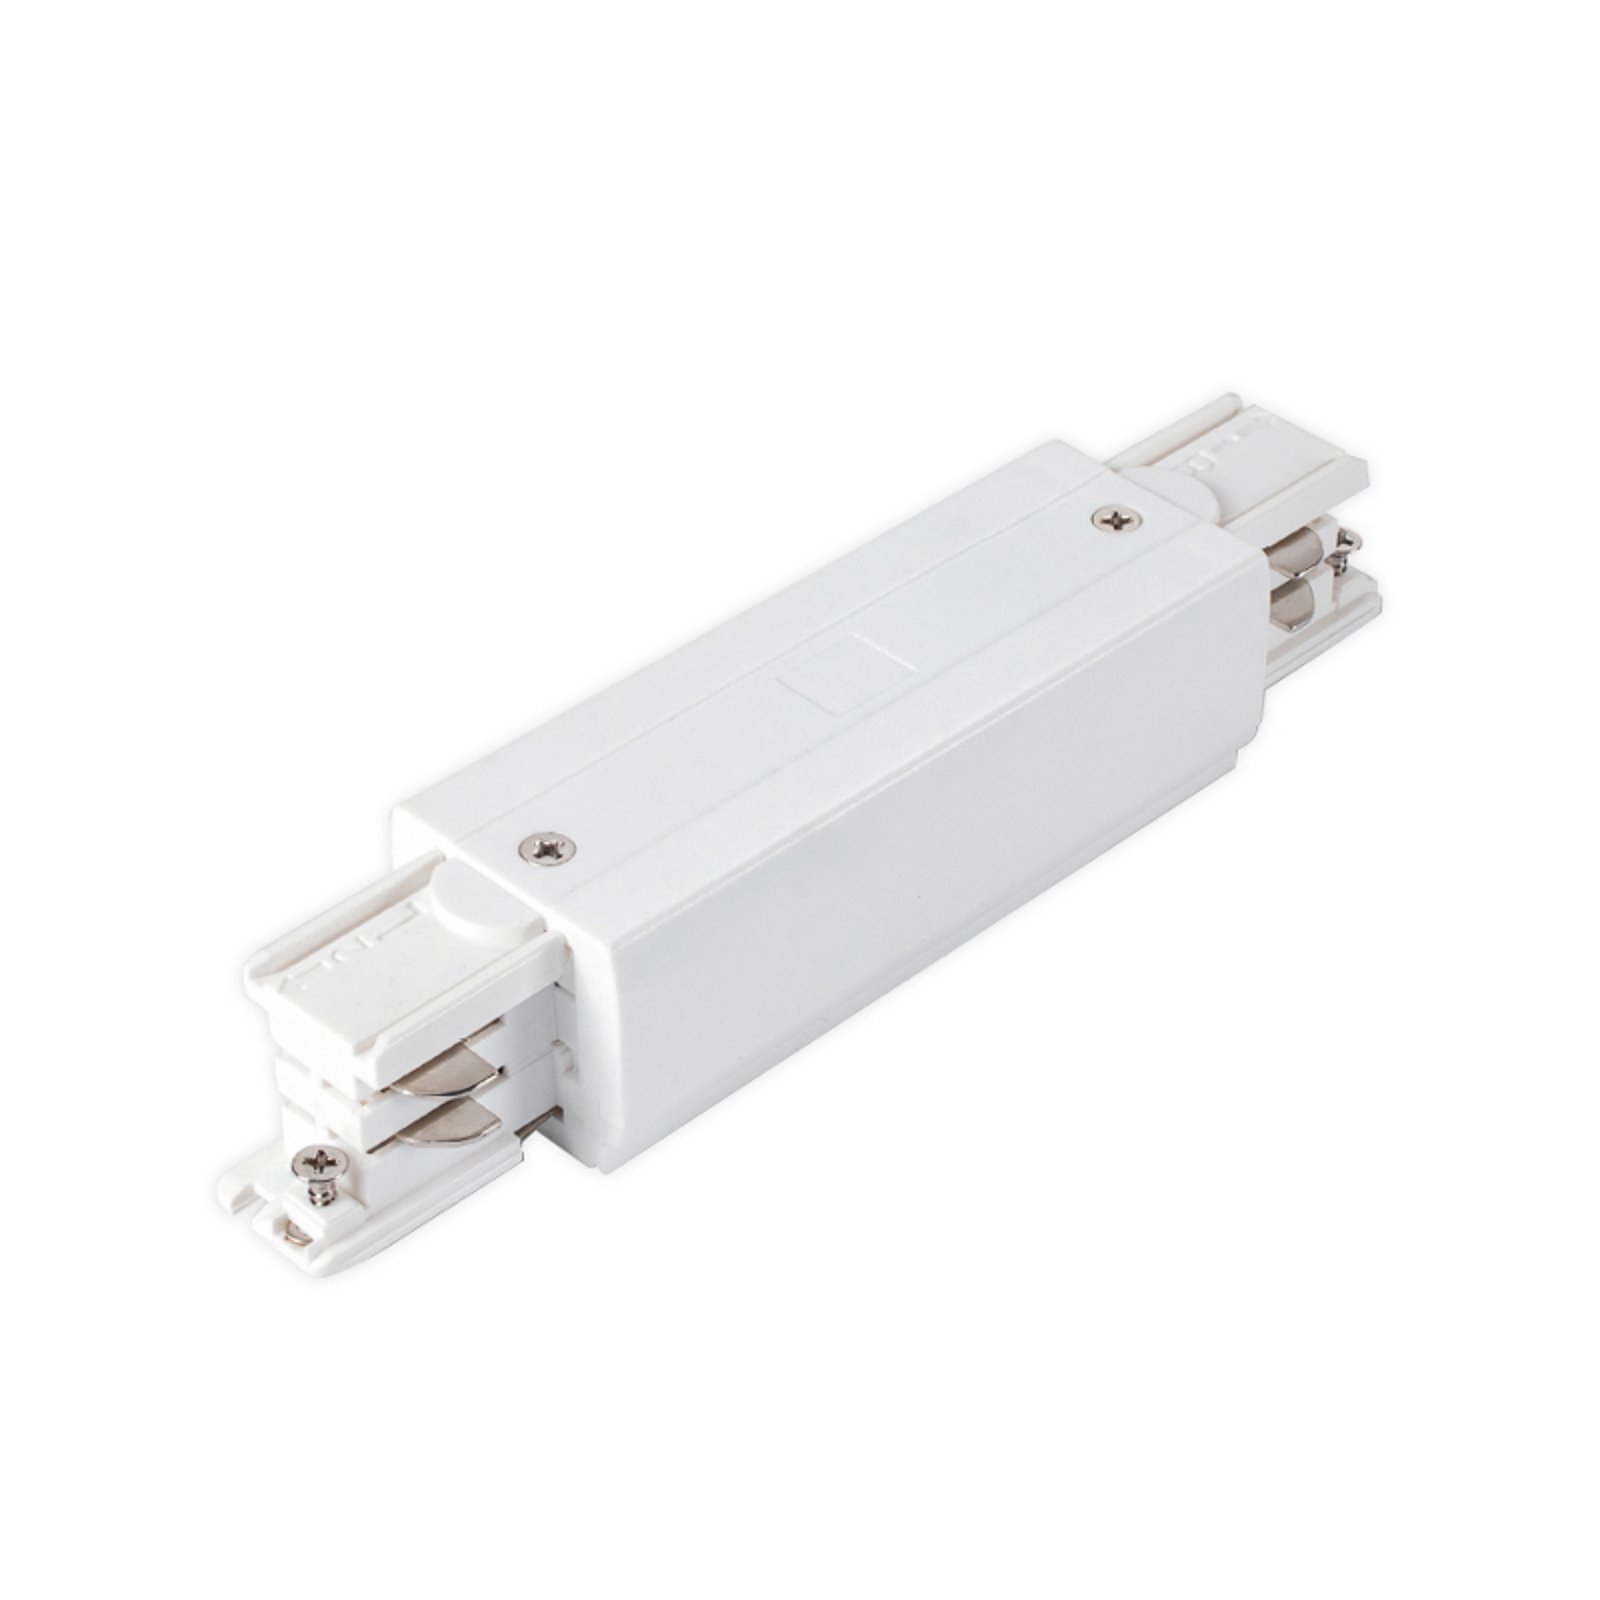 Arcchio central power feed for track lighting system white